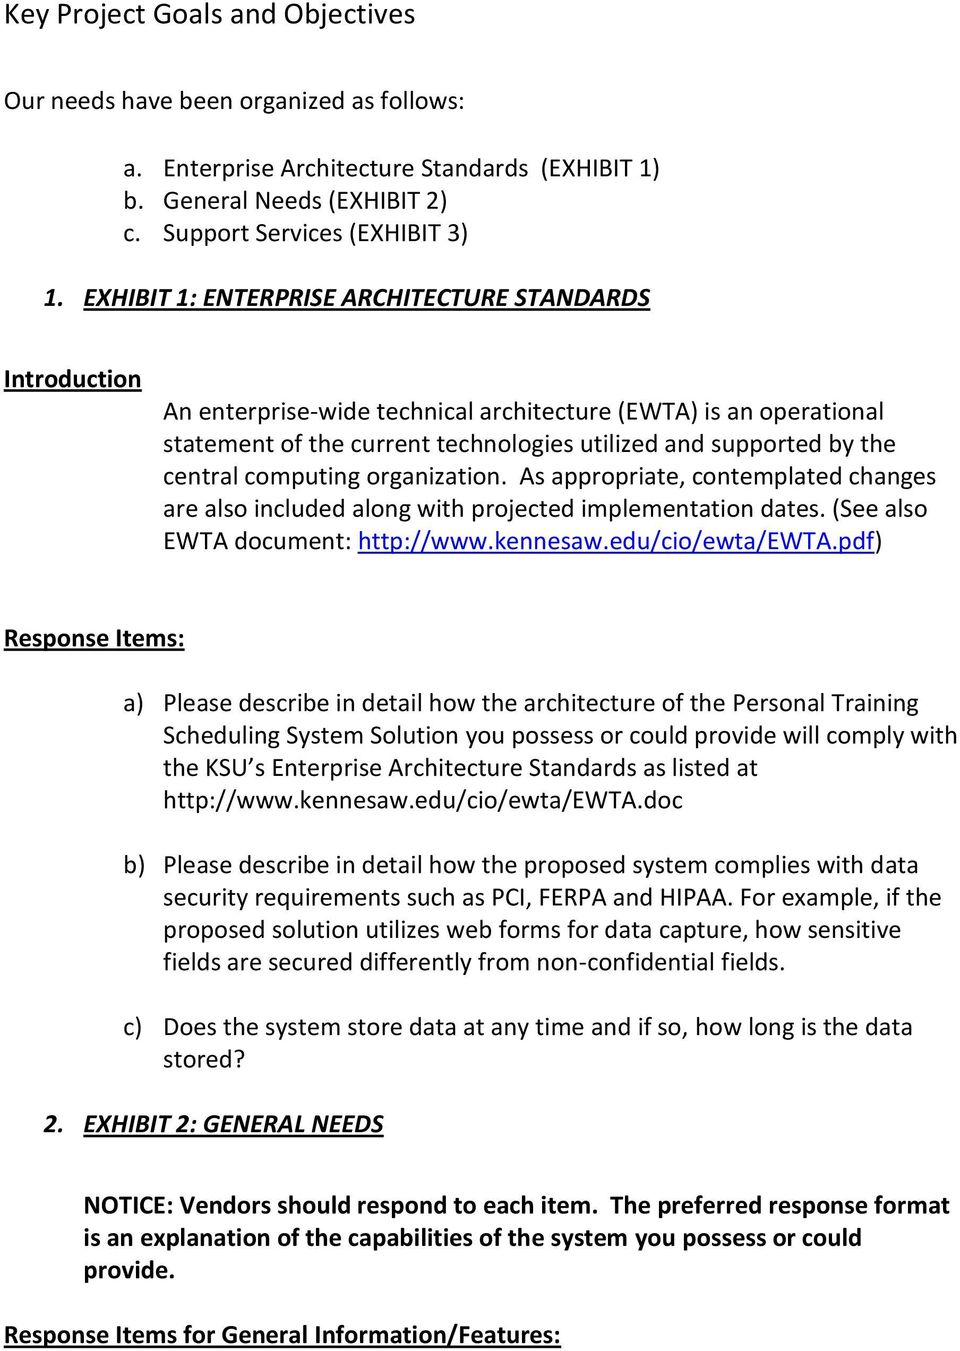 central computing organization. As appropriate, contemplated changes are also included along with projected implementation dates. (See also EWTA document: http://www.kennesaw.edu/cio/ewta/ewta.